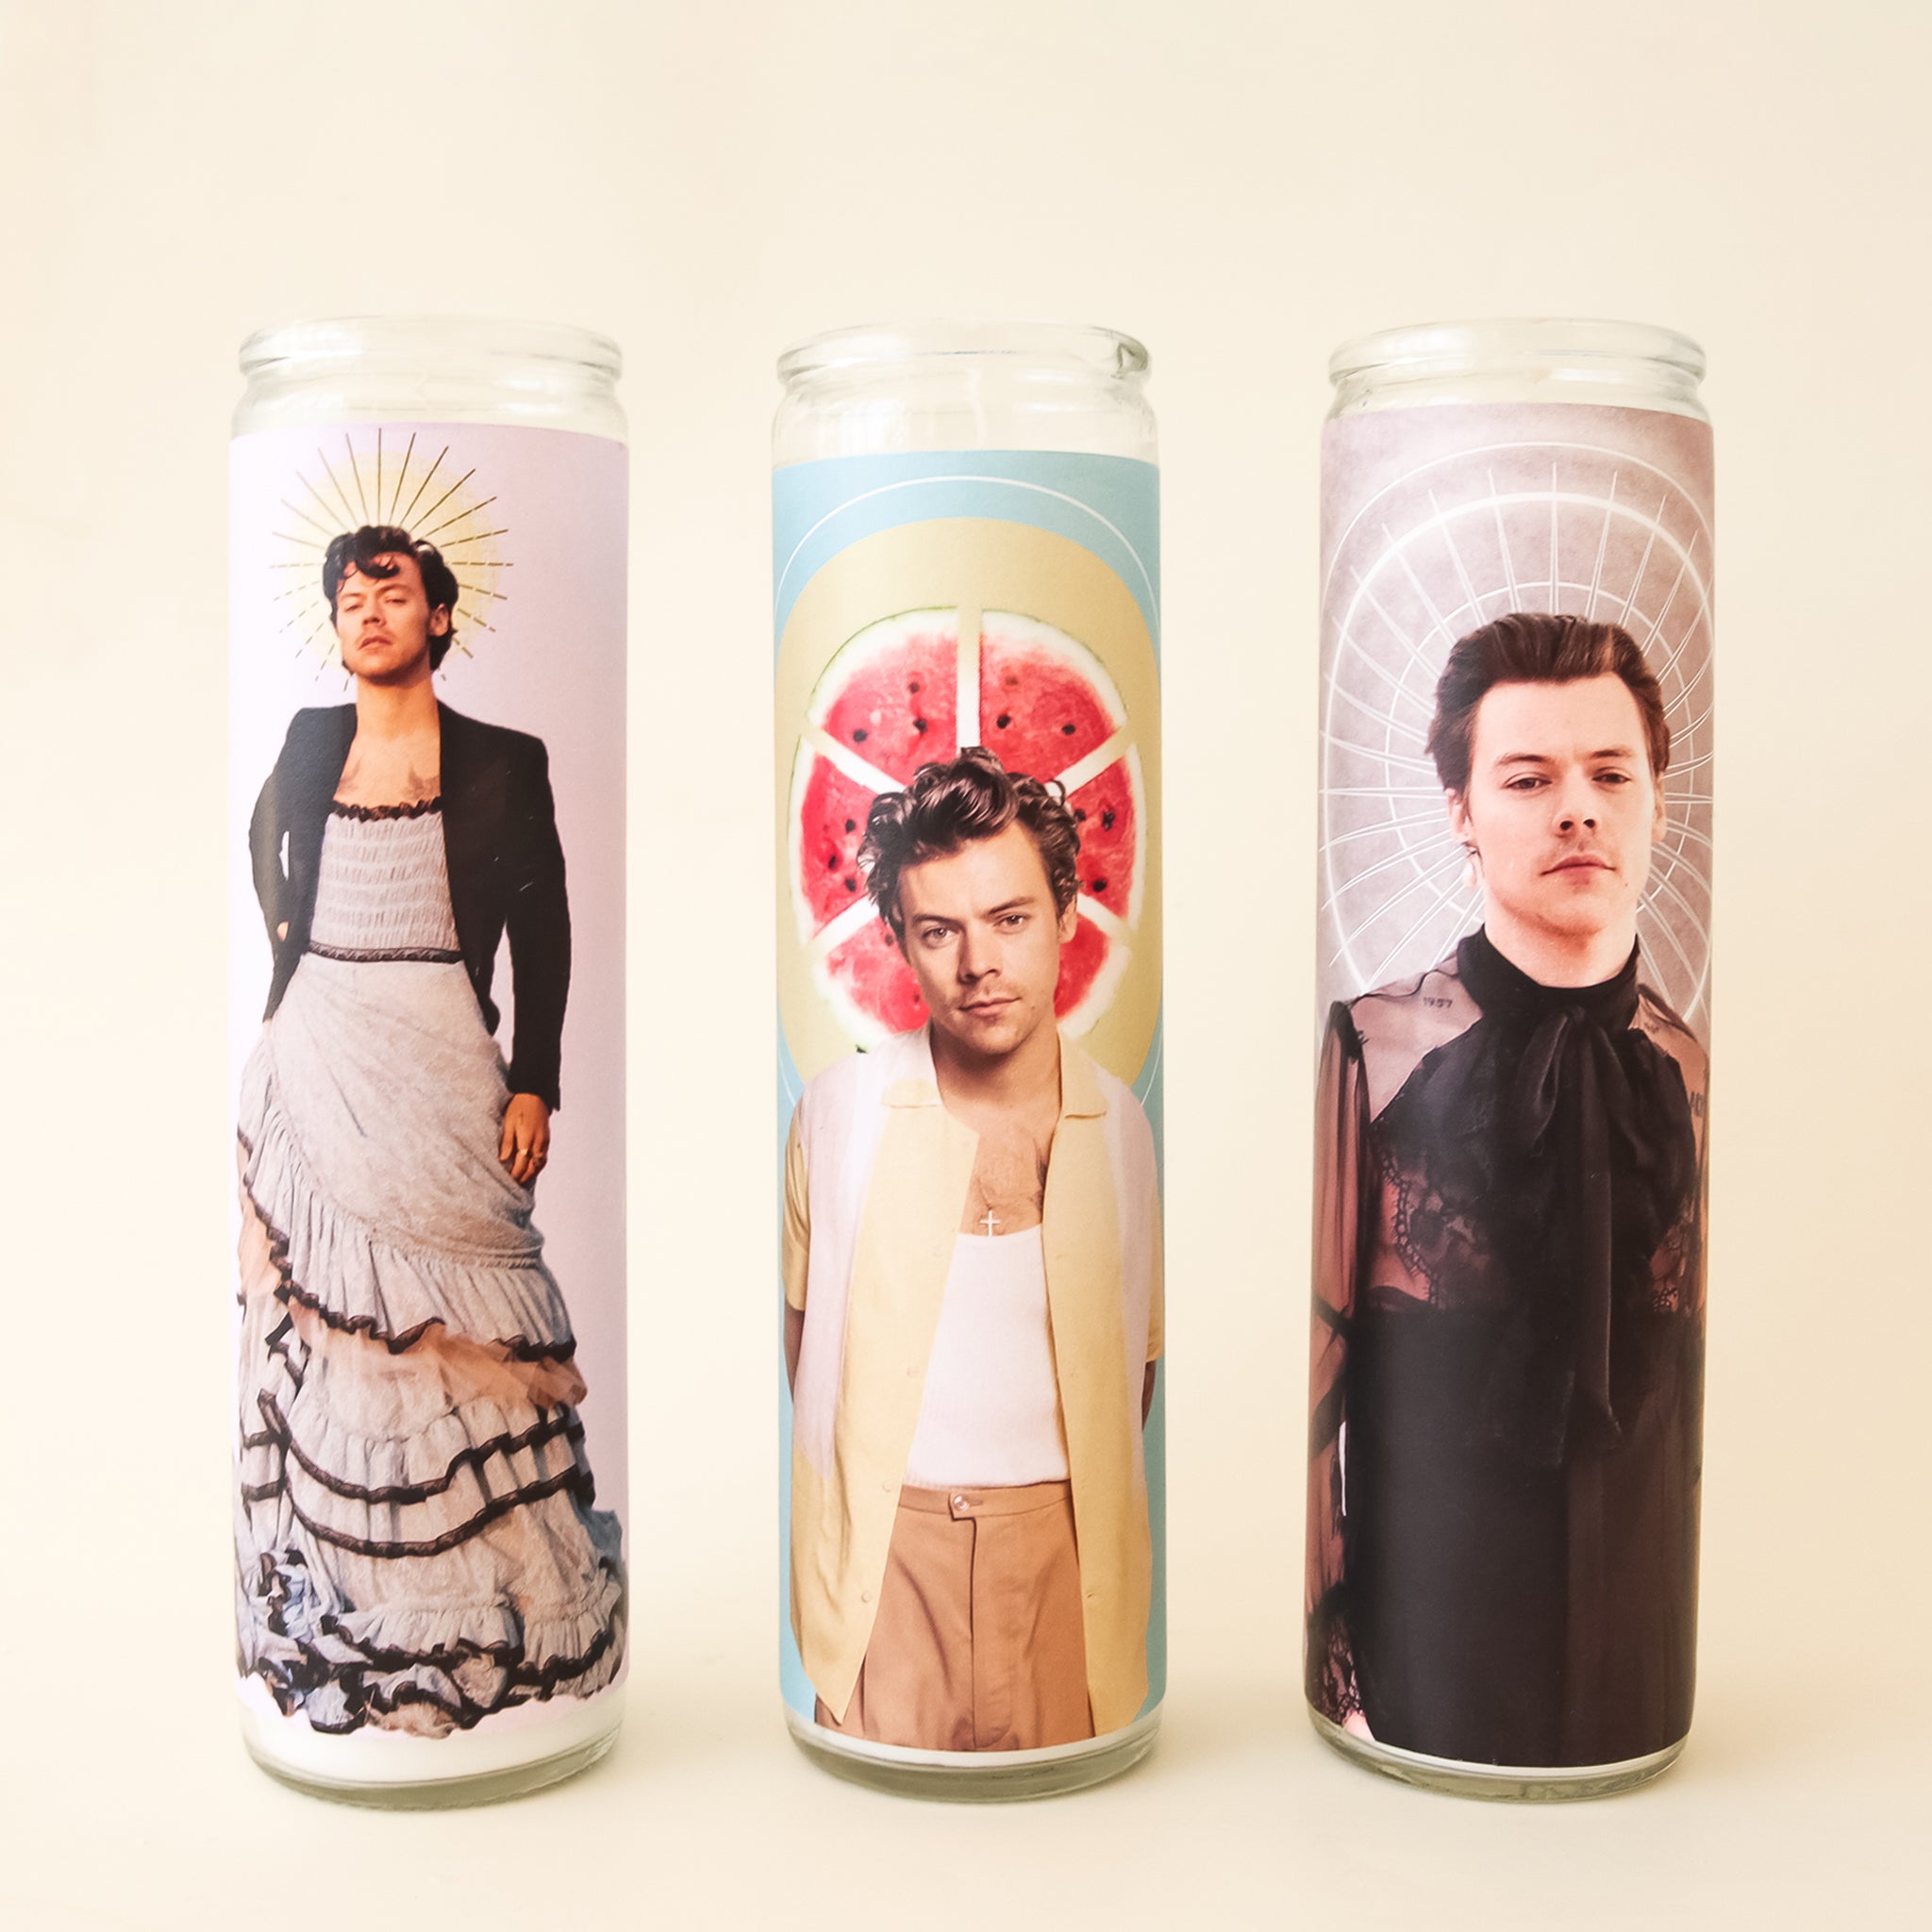 On a white background is a prayer candle with Harry Styles in a dress on the front photographed next to other available Harry Styles prayer candles on our site.